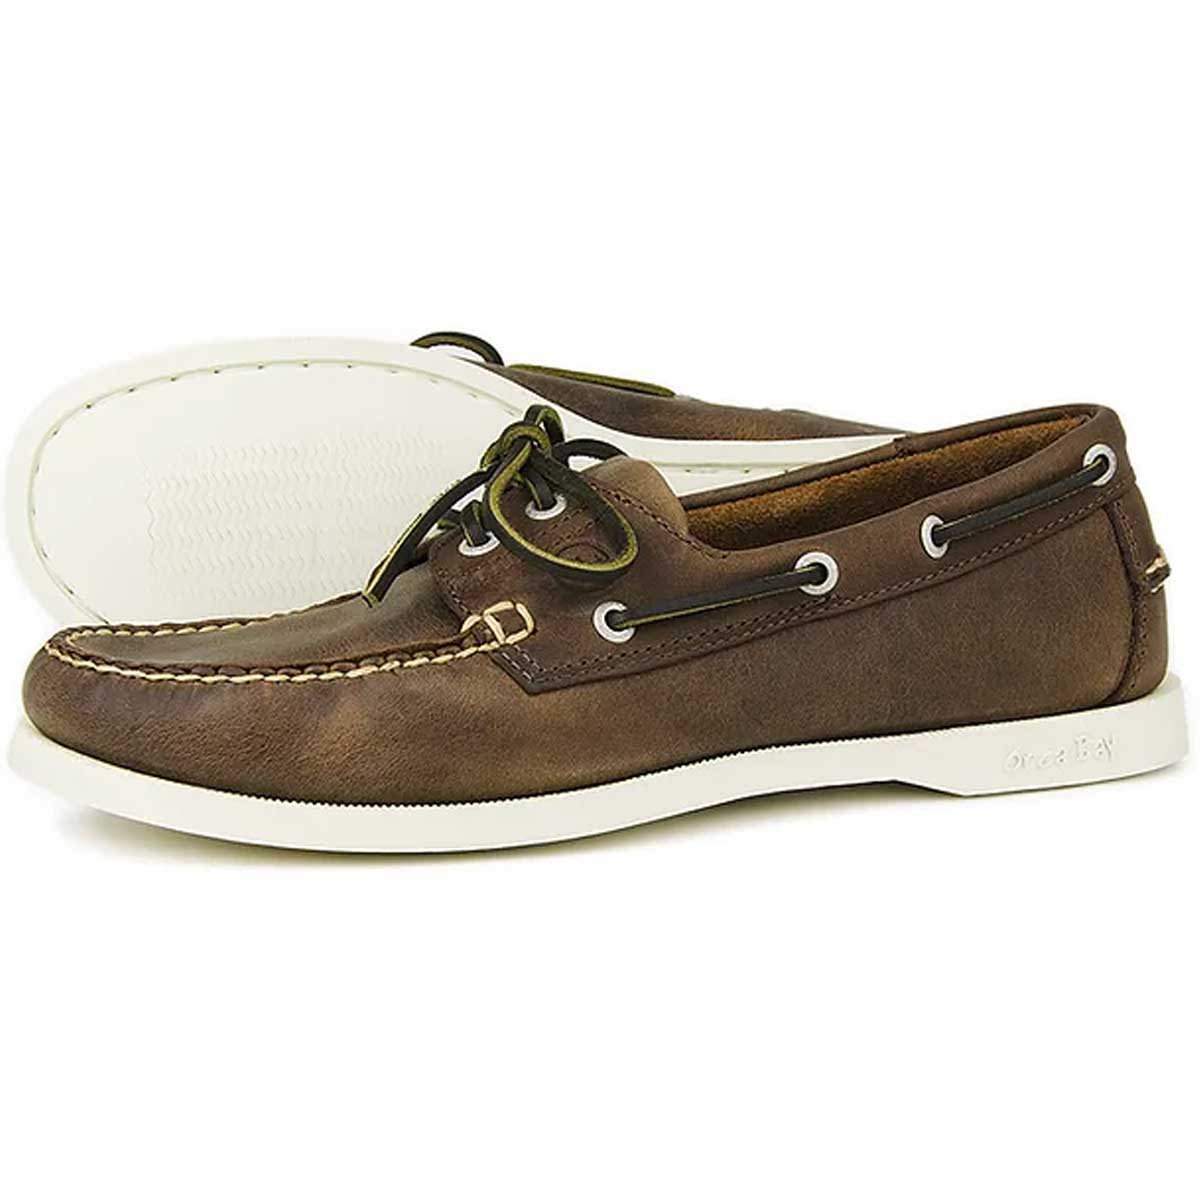 ORCA BAY Maine Leather Deck Shoes - Men's - Sand / Navy